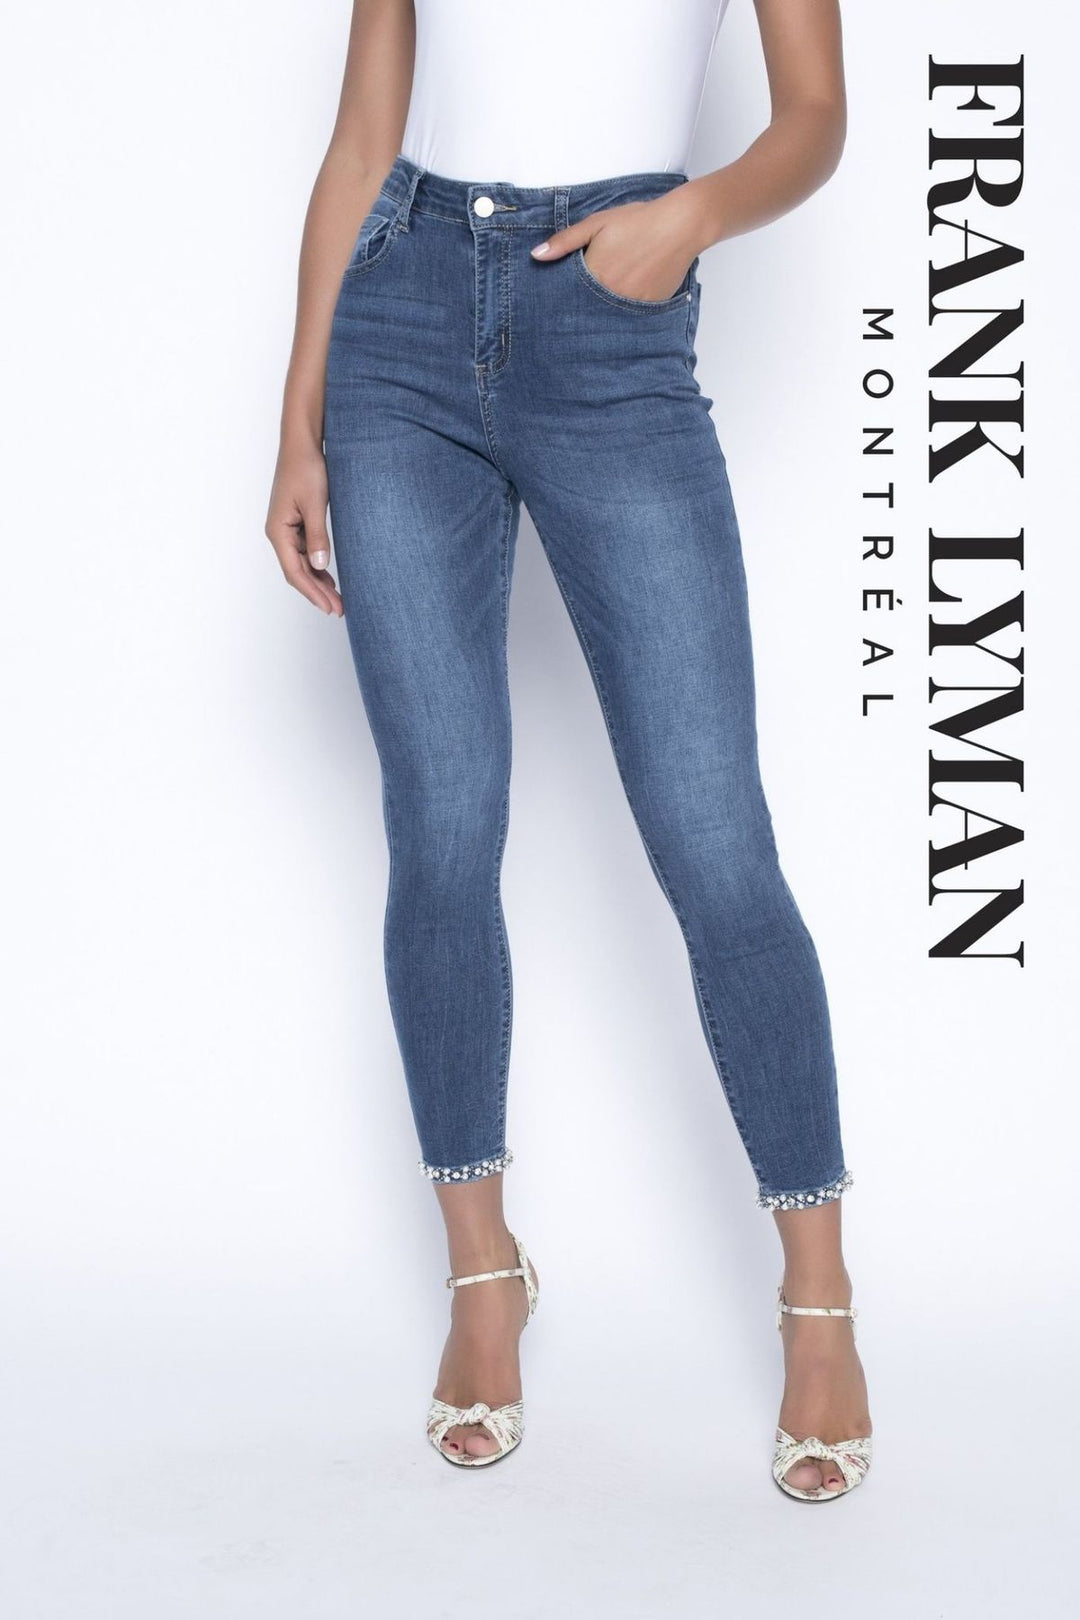 Frank Lyman 190117U  Jean with Pearl and Diamante Front Lifestyle | Dotique